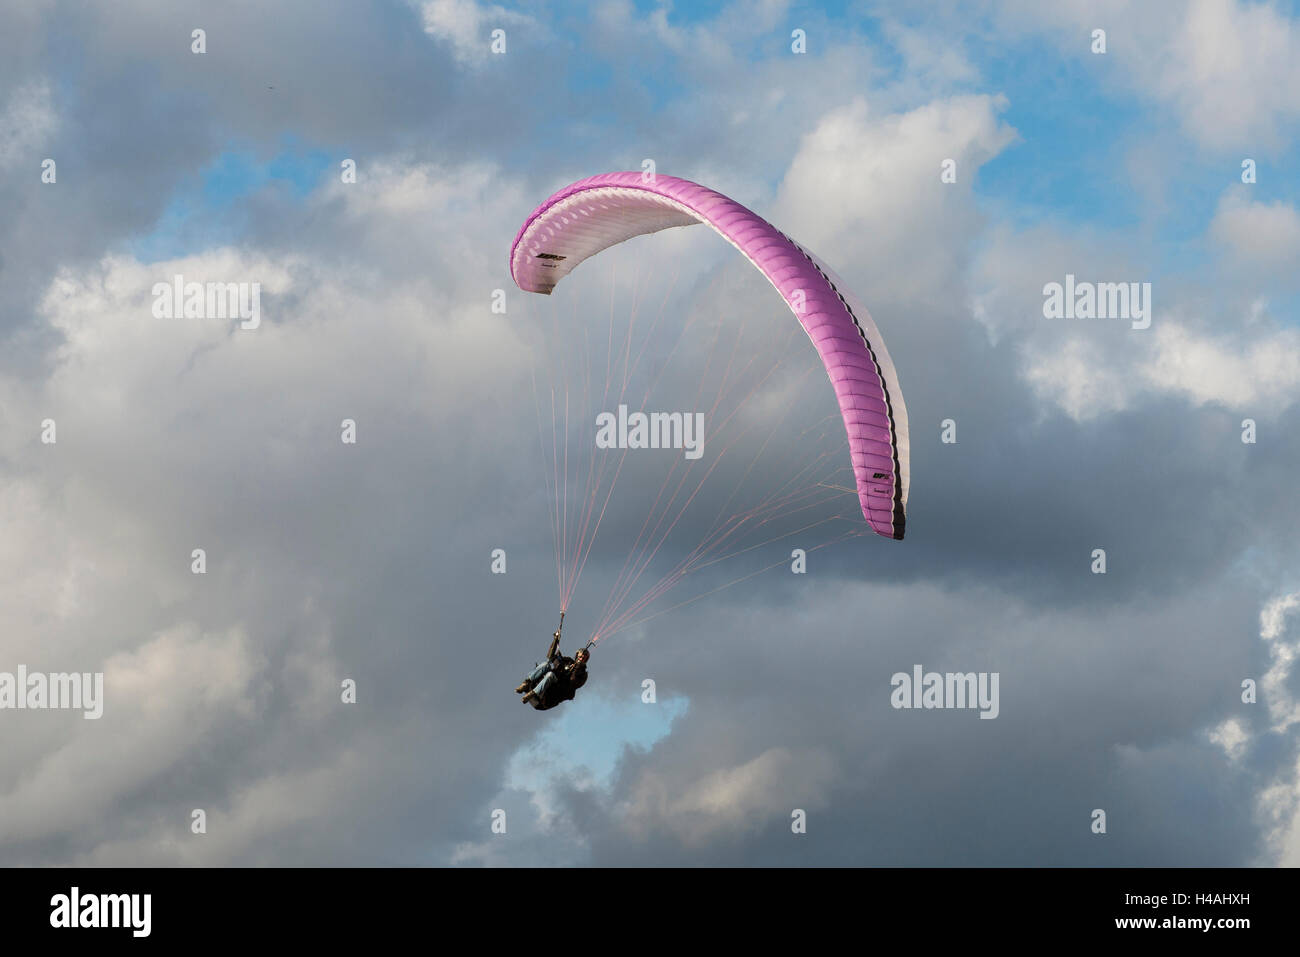 Paraglider, Paragliding, Andalusia, aviation, Algodonales, Olvera, clouds, aerial picture, aviation, province of Cadiz, Spain Stock Photo